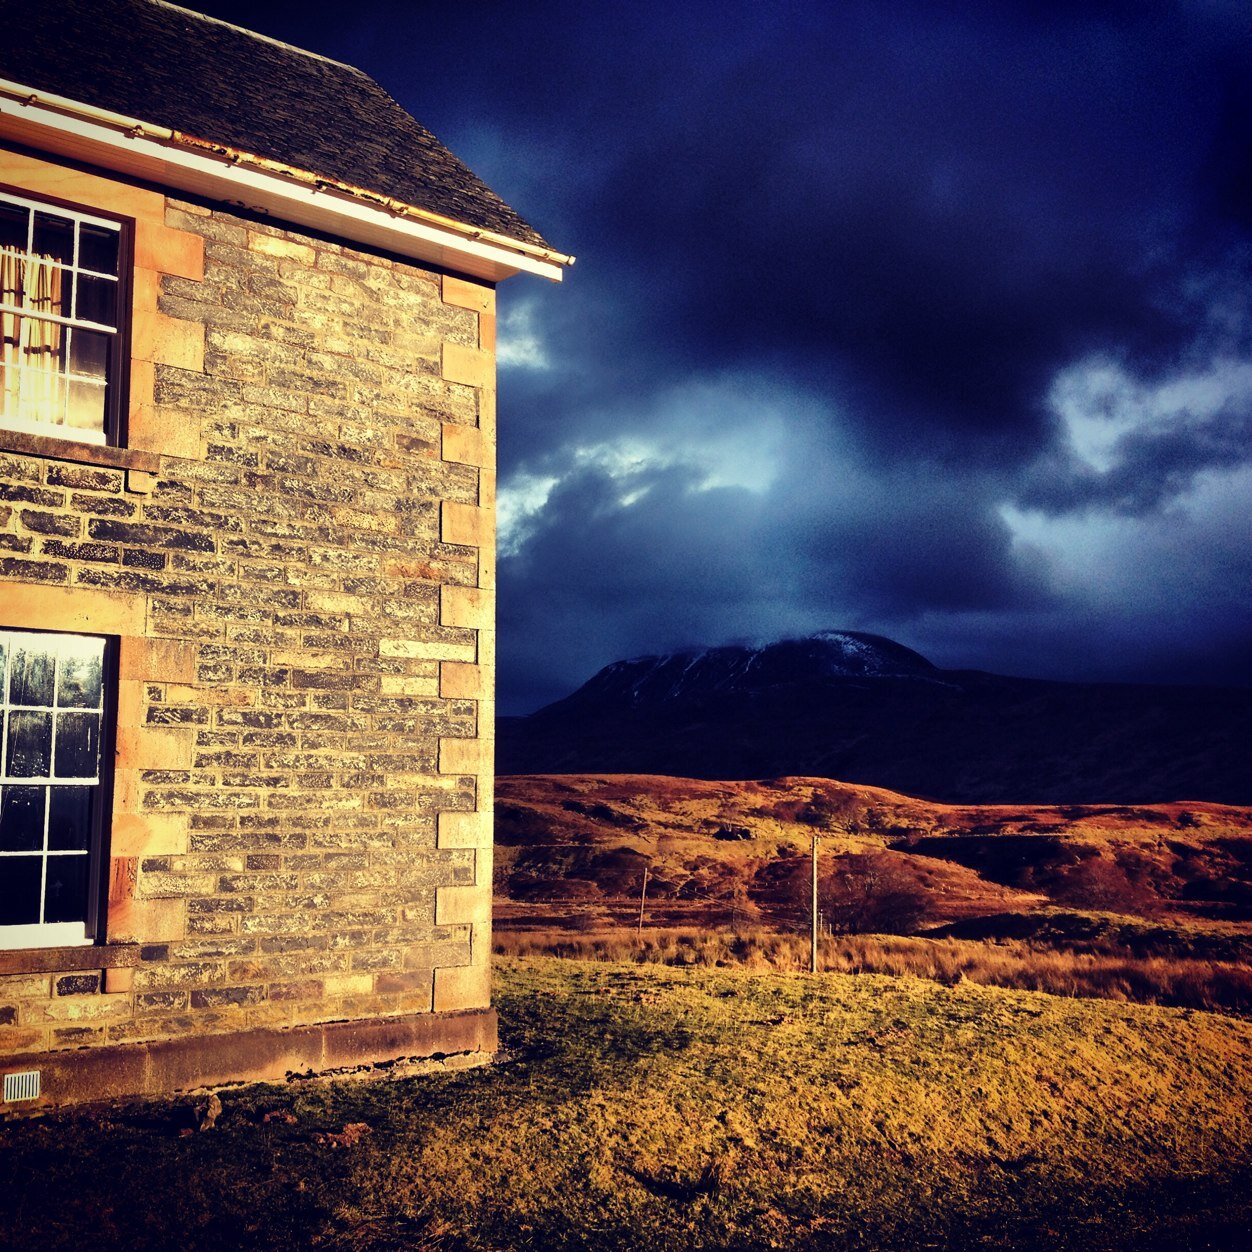 Strathvaich Estate is set in the heart of the Scottish Highlands.